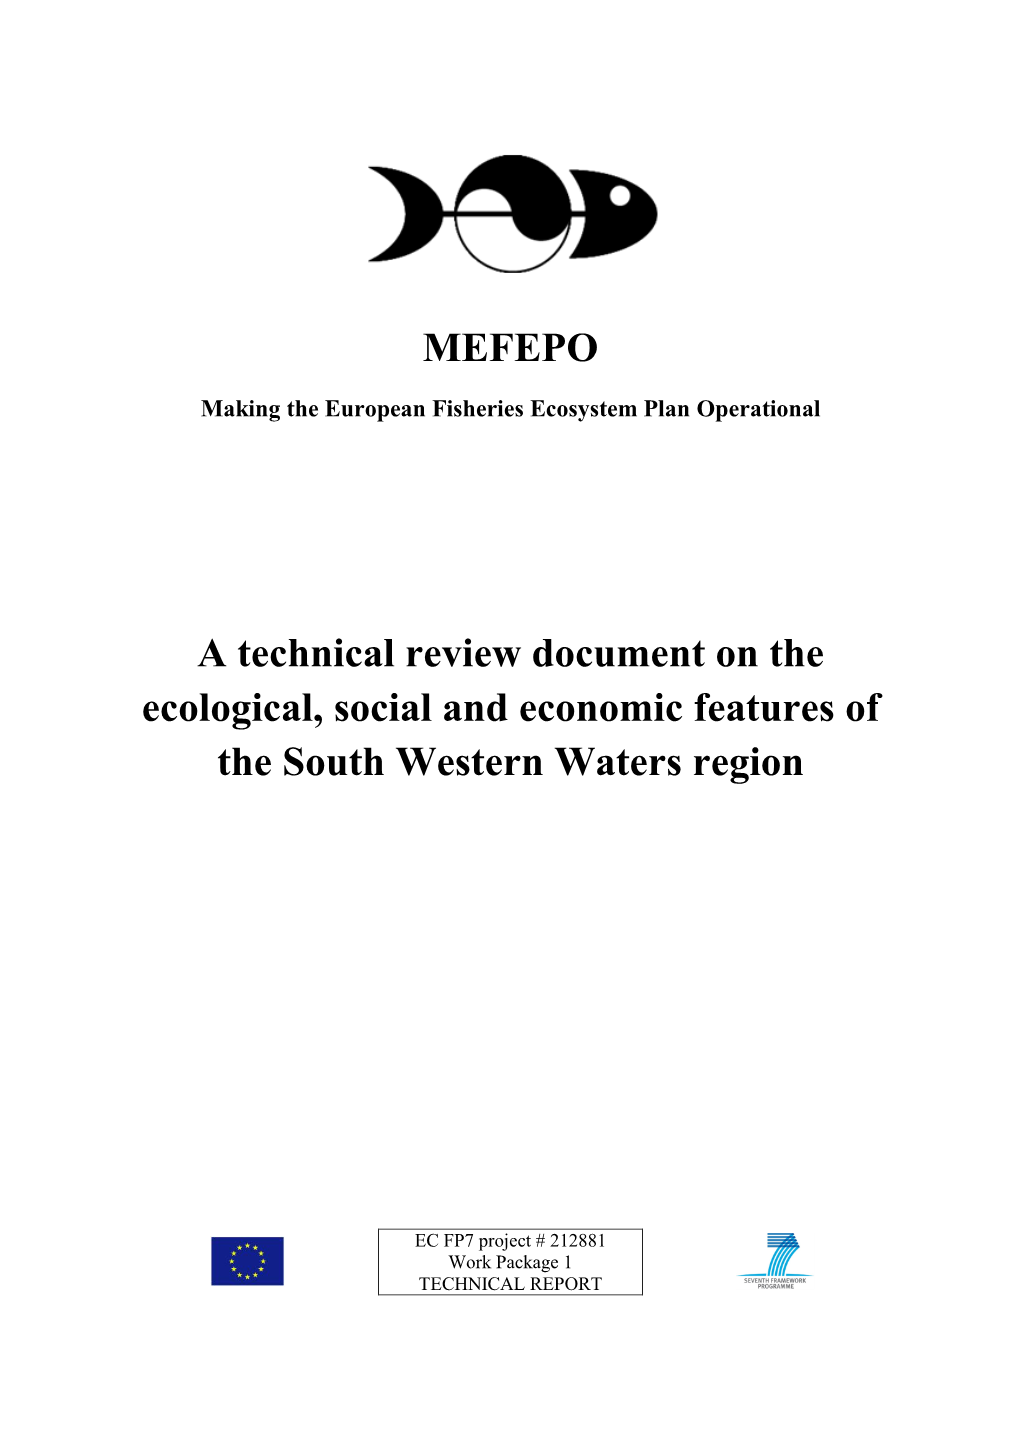 A Technical Review Document on the Ecological, Social and Economic Features of the South Western Waters Region